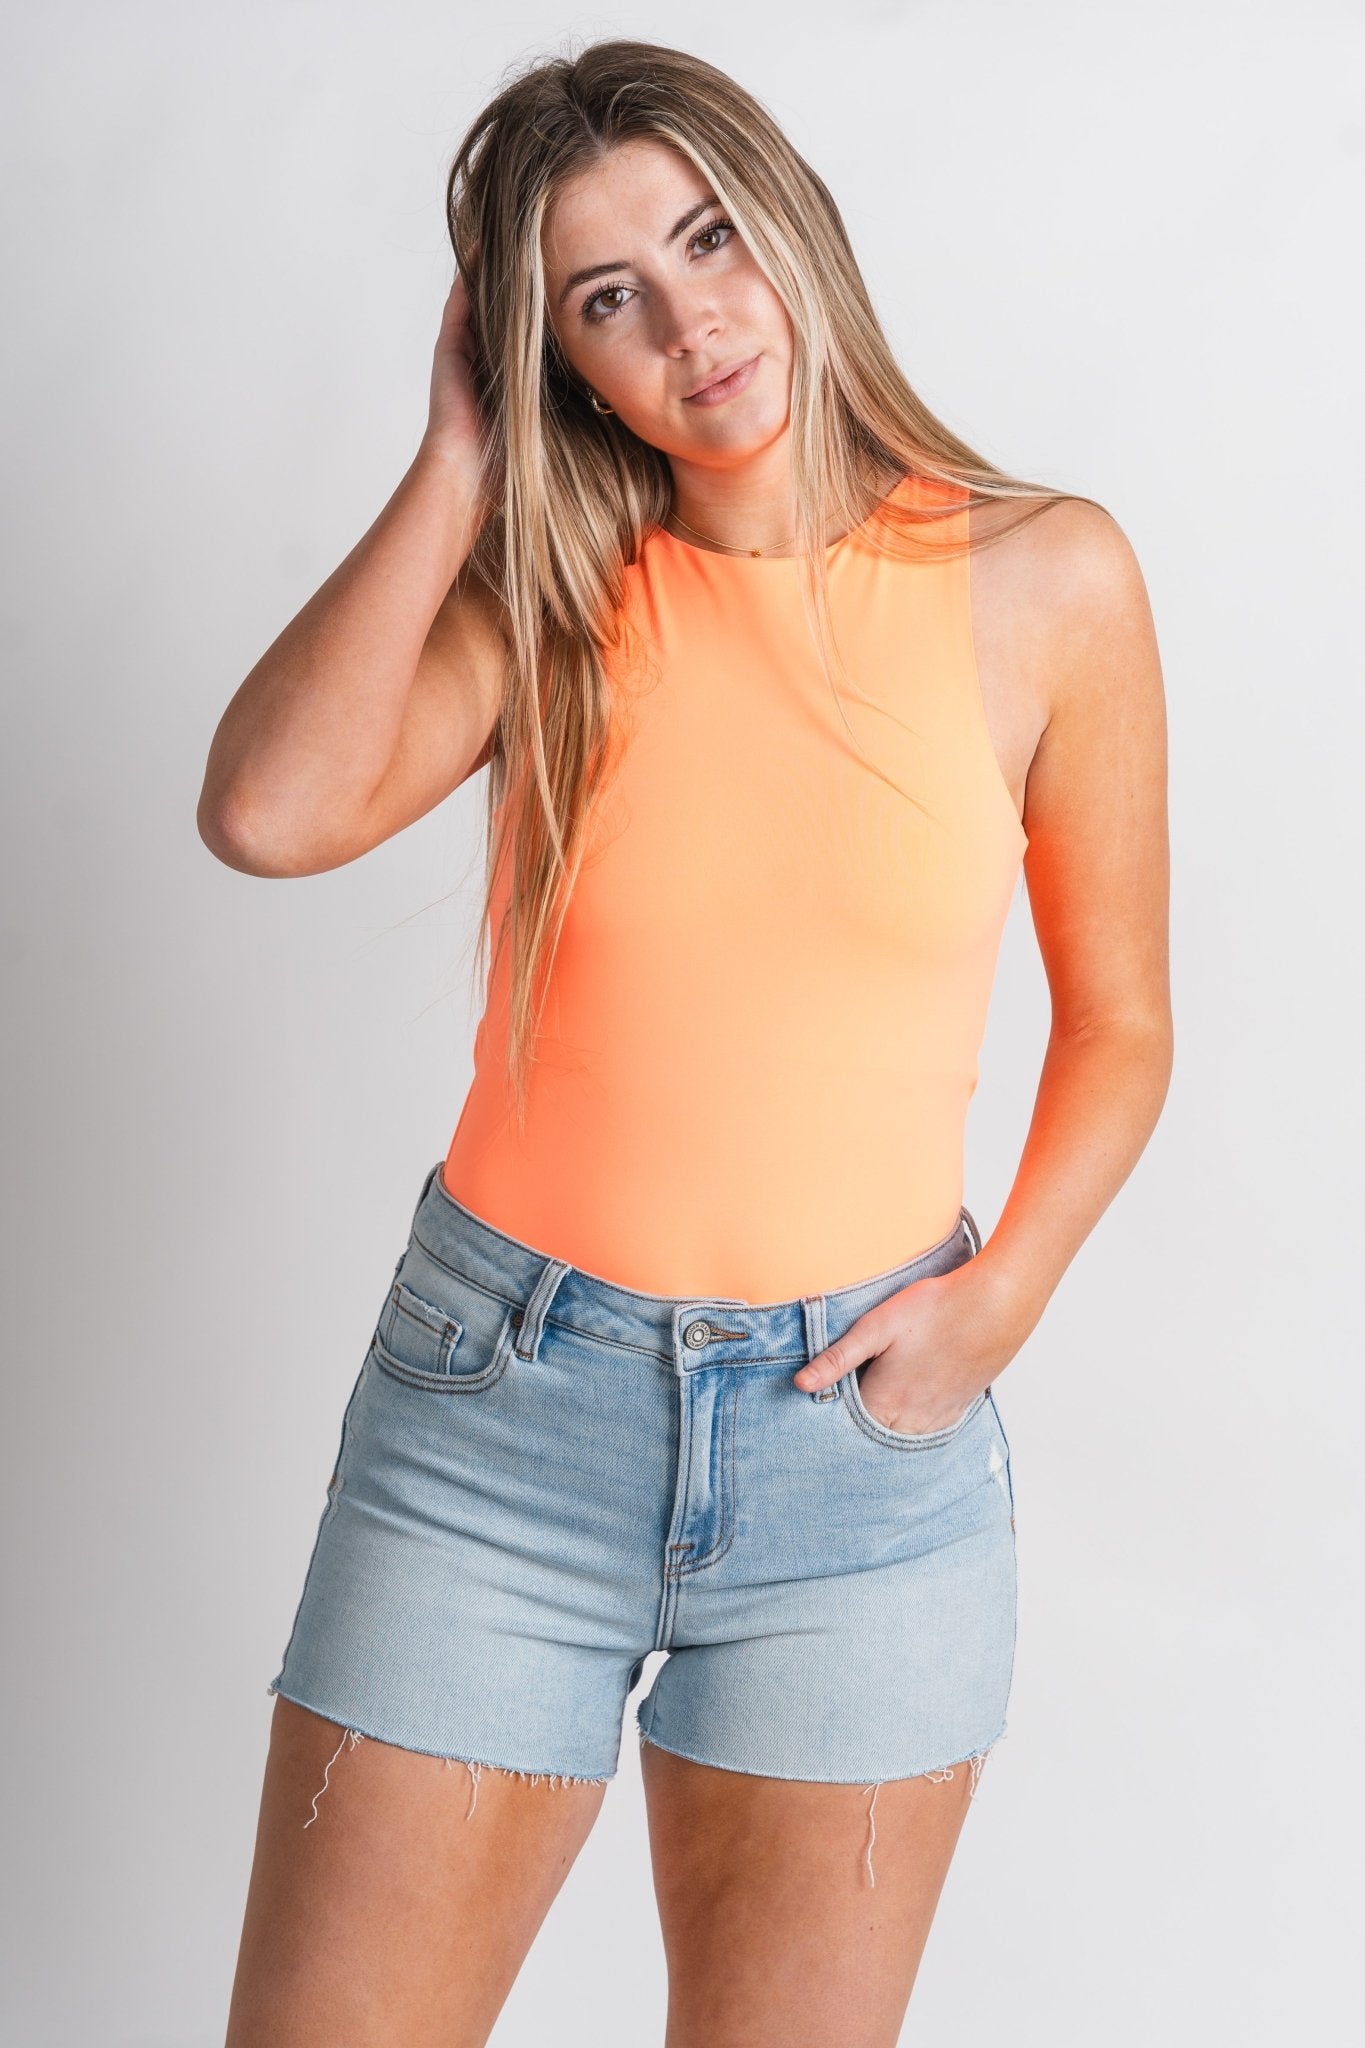 Sleeveless smooth soft bodysuit neon coral - Cute bodysuit - Fun Vacay Basics at Lush Fashion Lounge Boutique in Oklahoma City